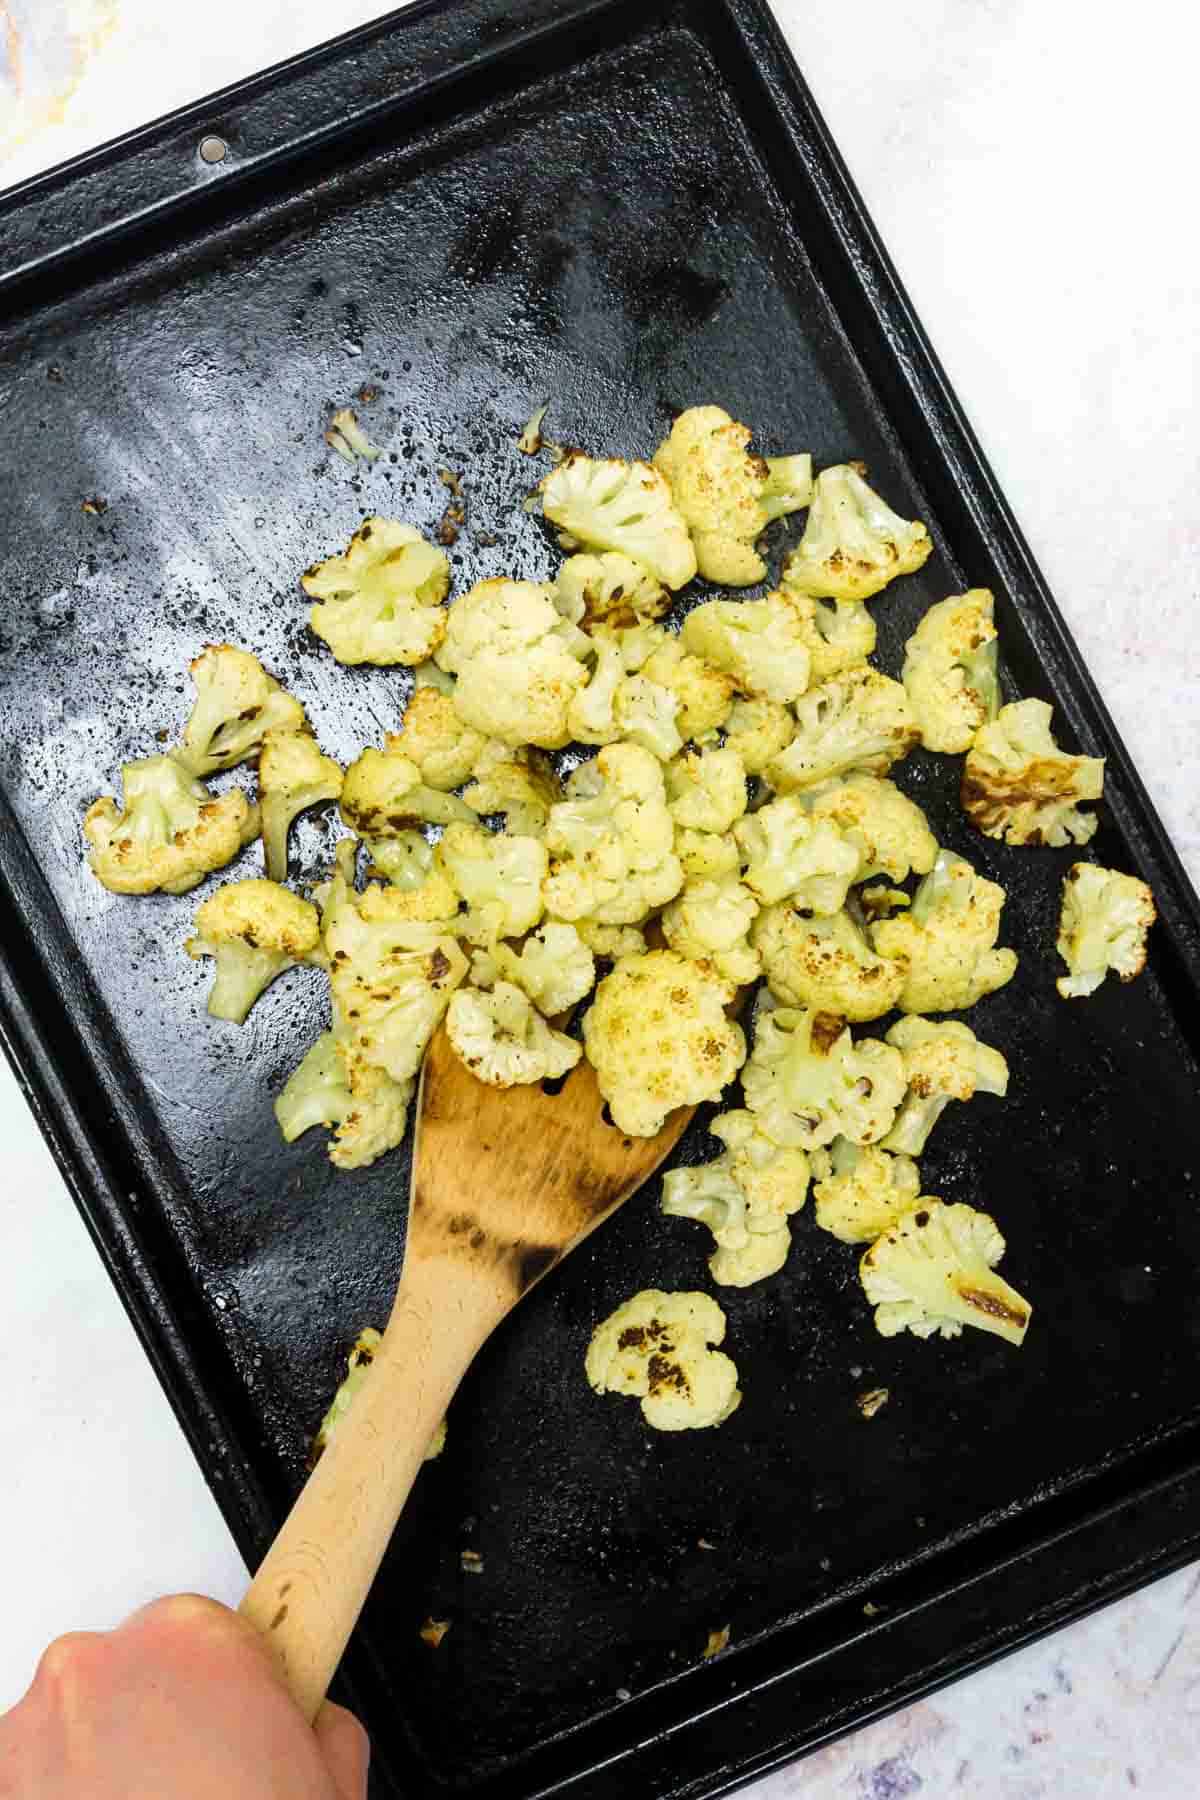 A wooden spoon stirs a baking sheet filled with cauliflower florets.